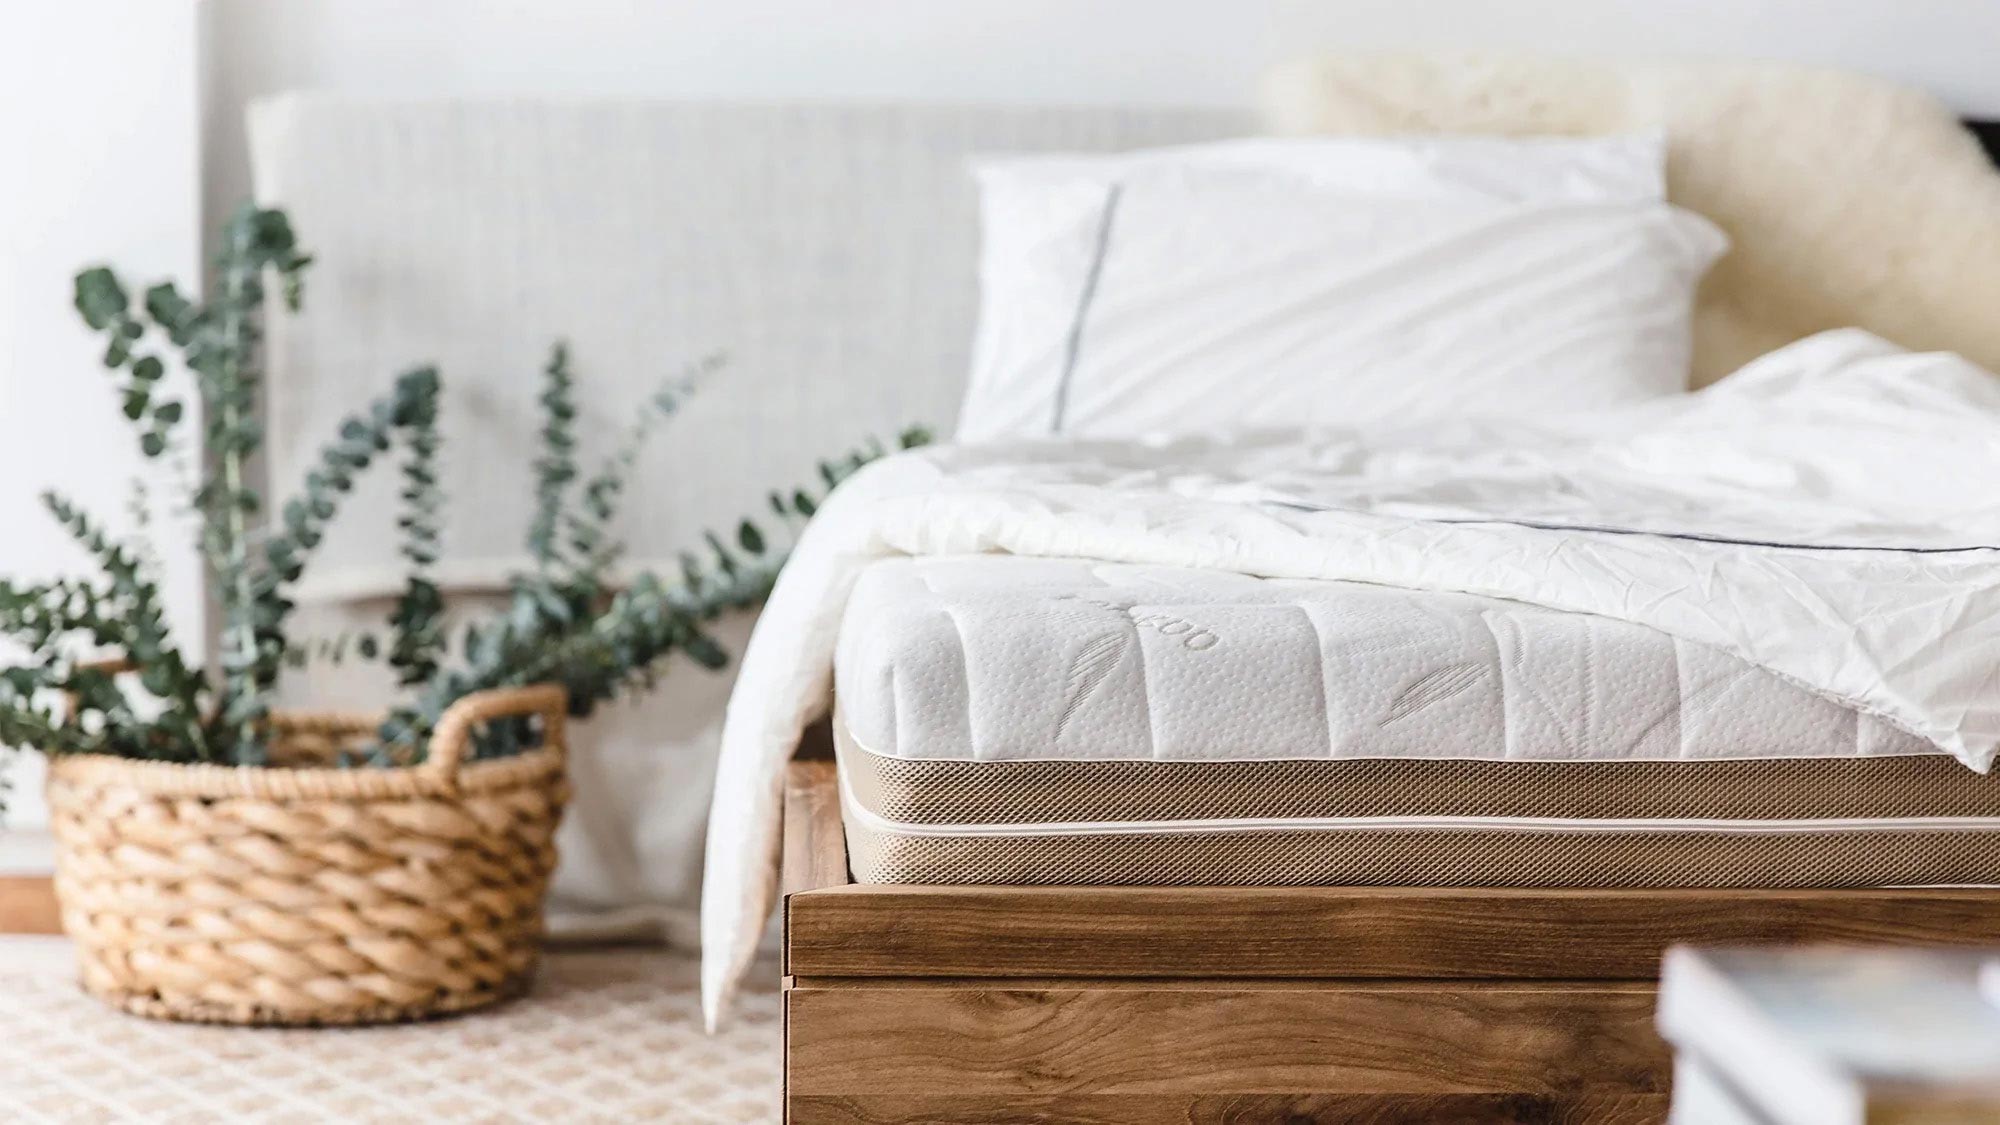 Which Mattress To Buy? Mattress Buying Guide